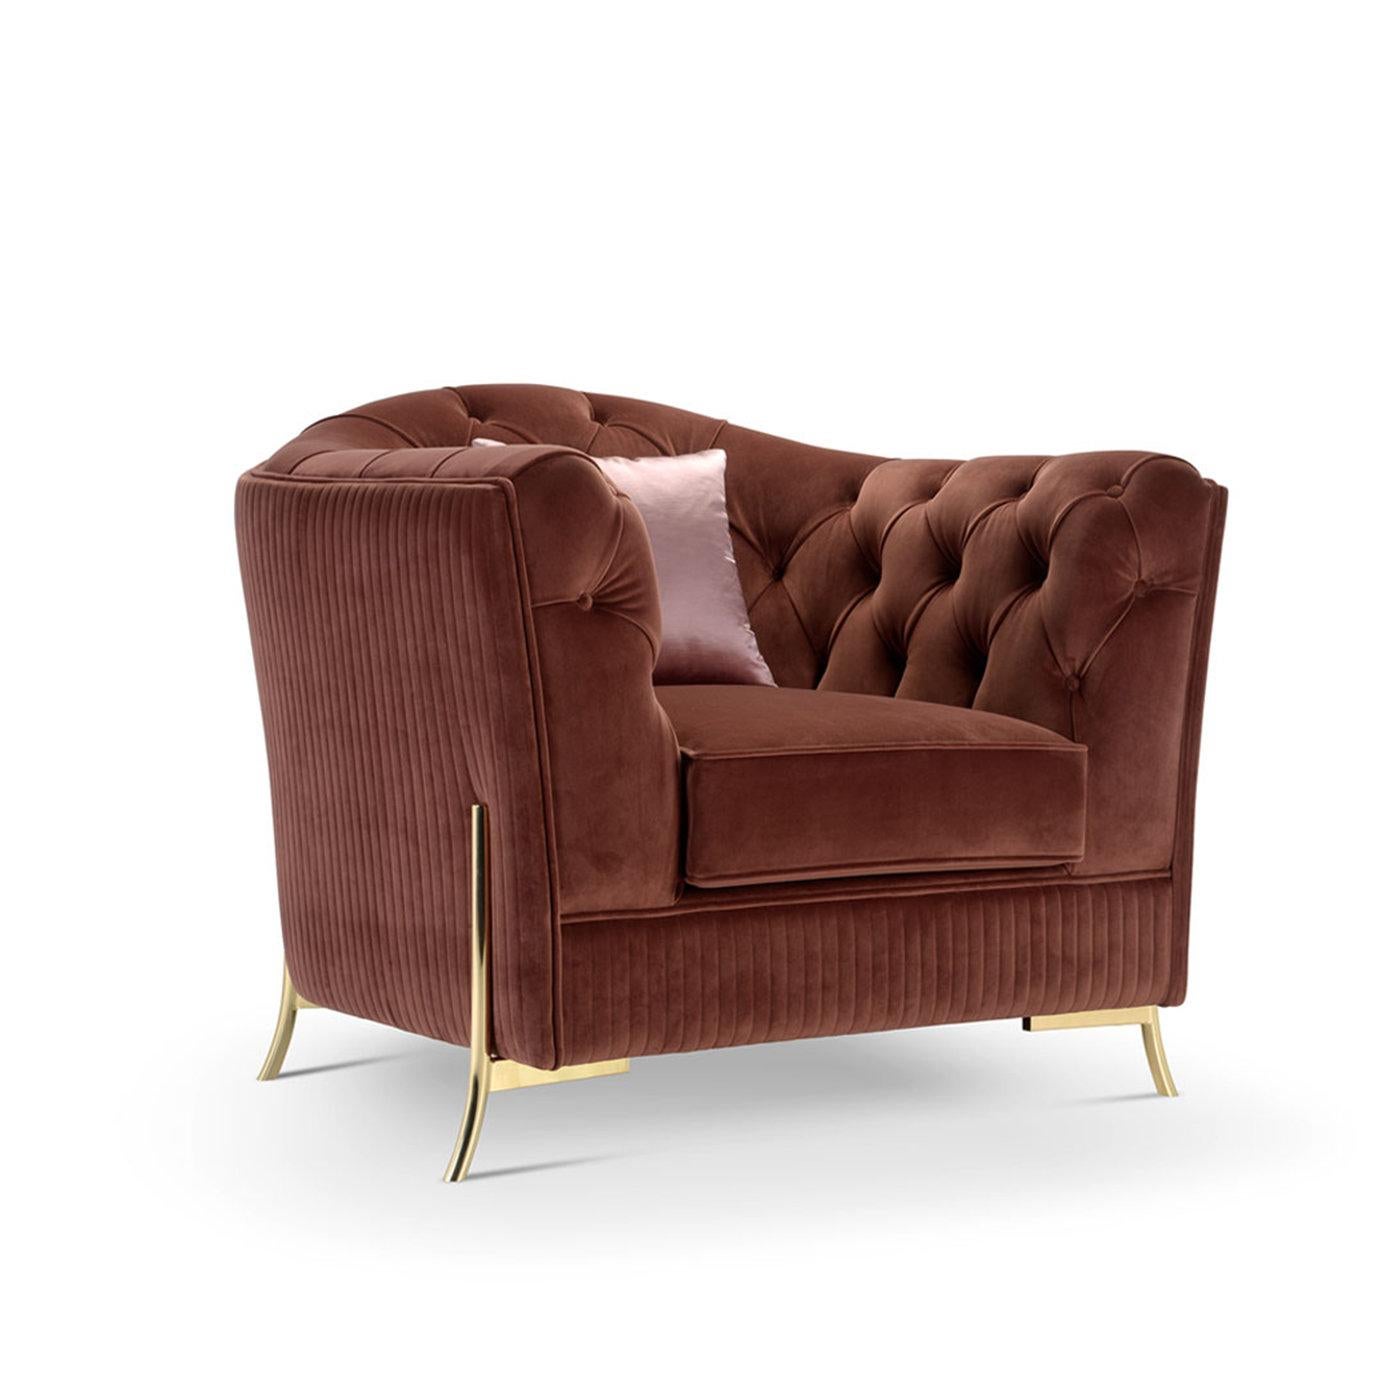 Nefele - the nymph born from a cloud with Zeus's help - inspired the luxurious silhouette of this handmade armchair. Raised on sinuous metal legs with a galvanized brass finish, the seat provides utmost comfort thanks to the generous padding